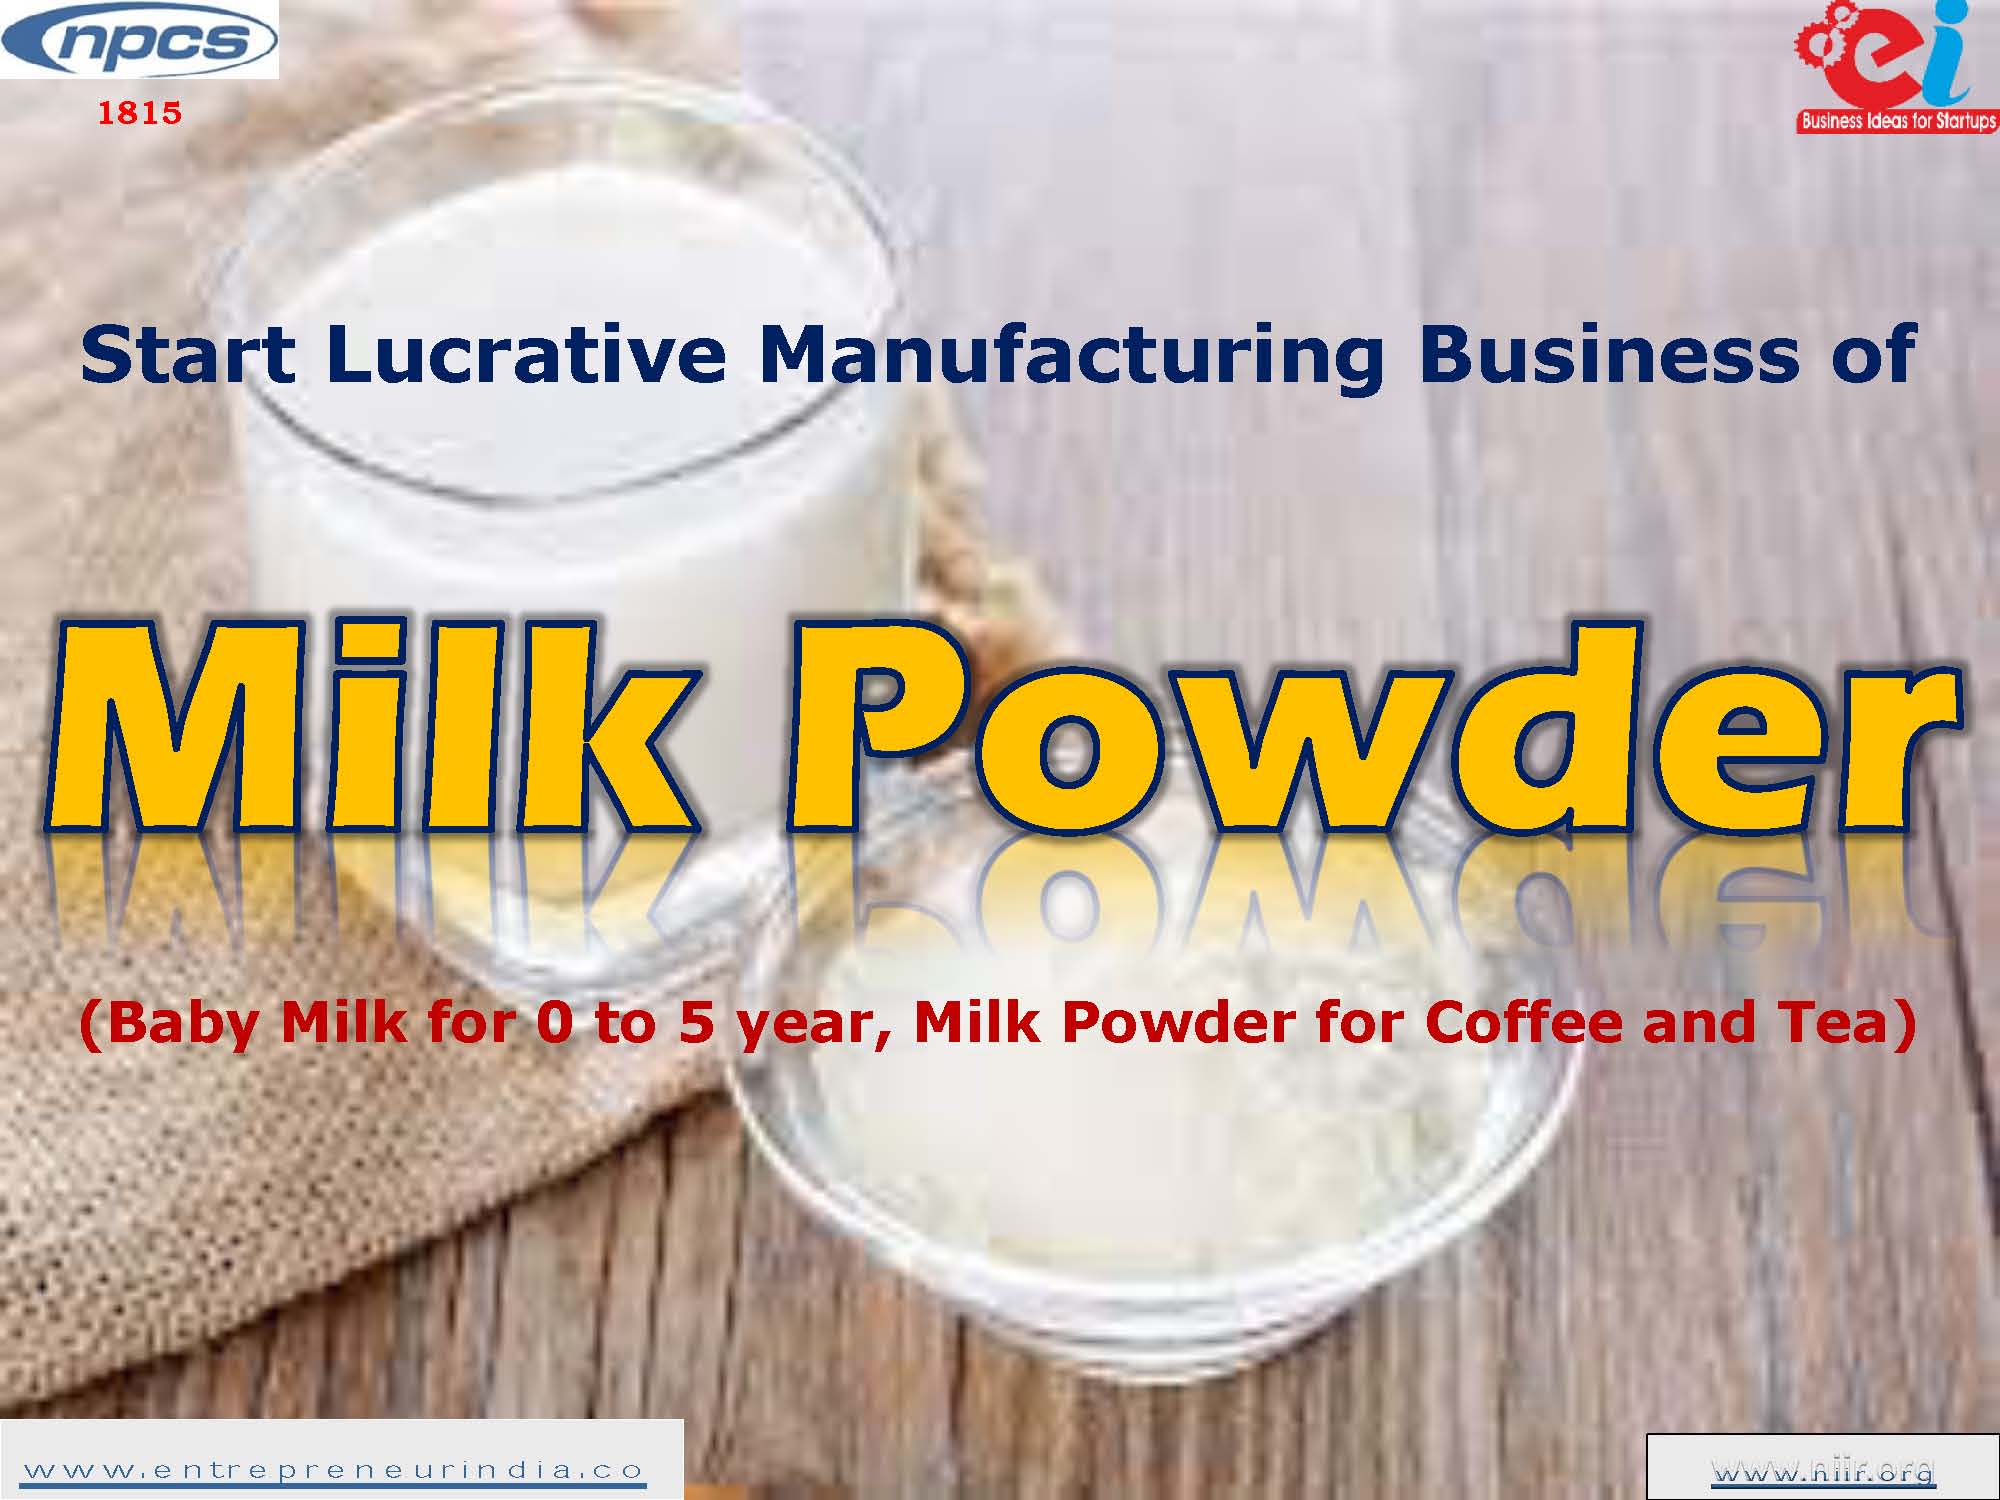 Start Lucrative Manufacturing Business of Milk Powder (Baby Milk for 0 to 5 year, Milk Powder for Coffee and Tea)